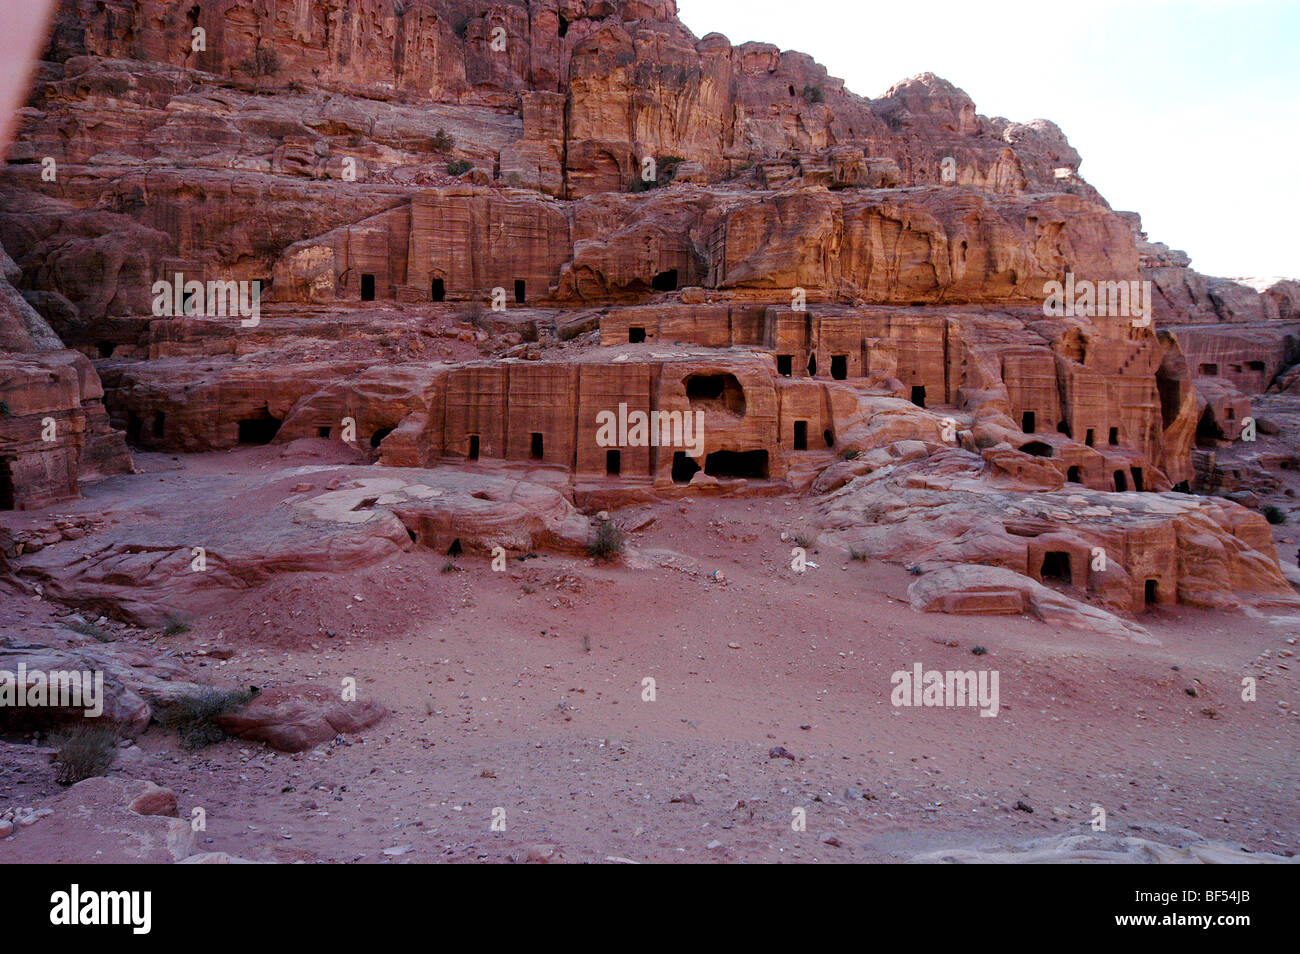 Some of the tombs in the streets of Facades, designed for the ease of communication in the next world, Petra, Jordan. Stock Photo